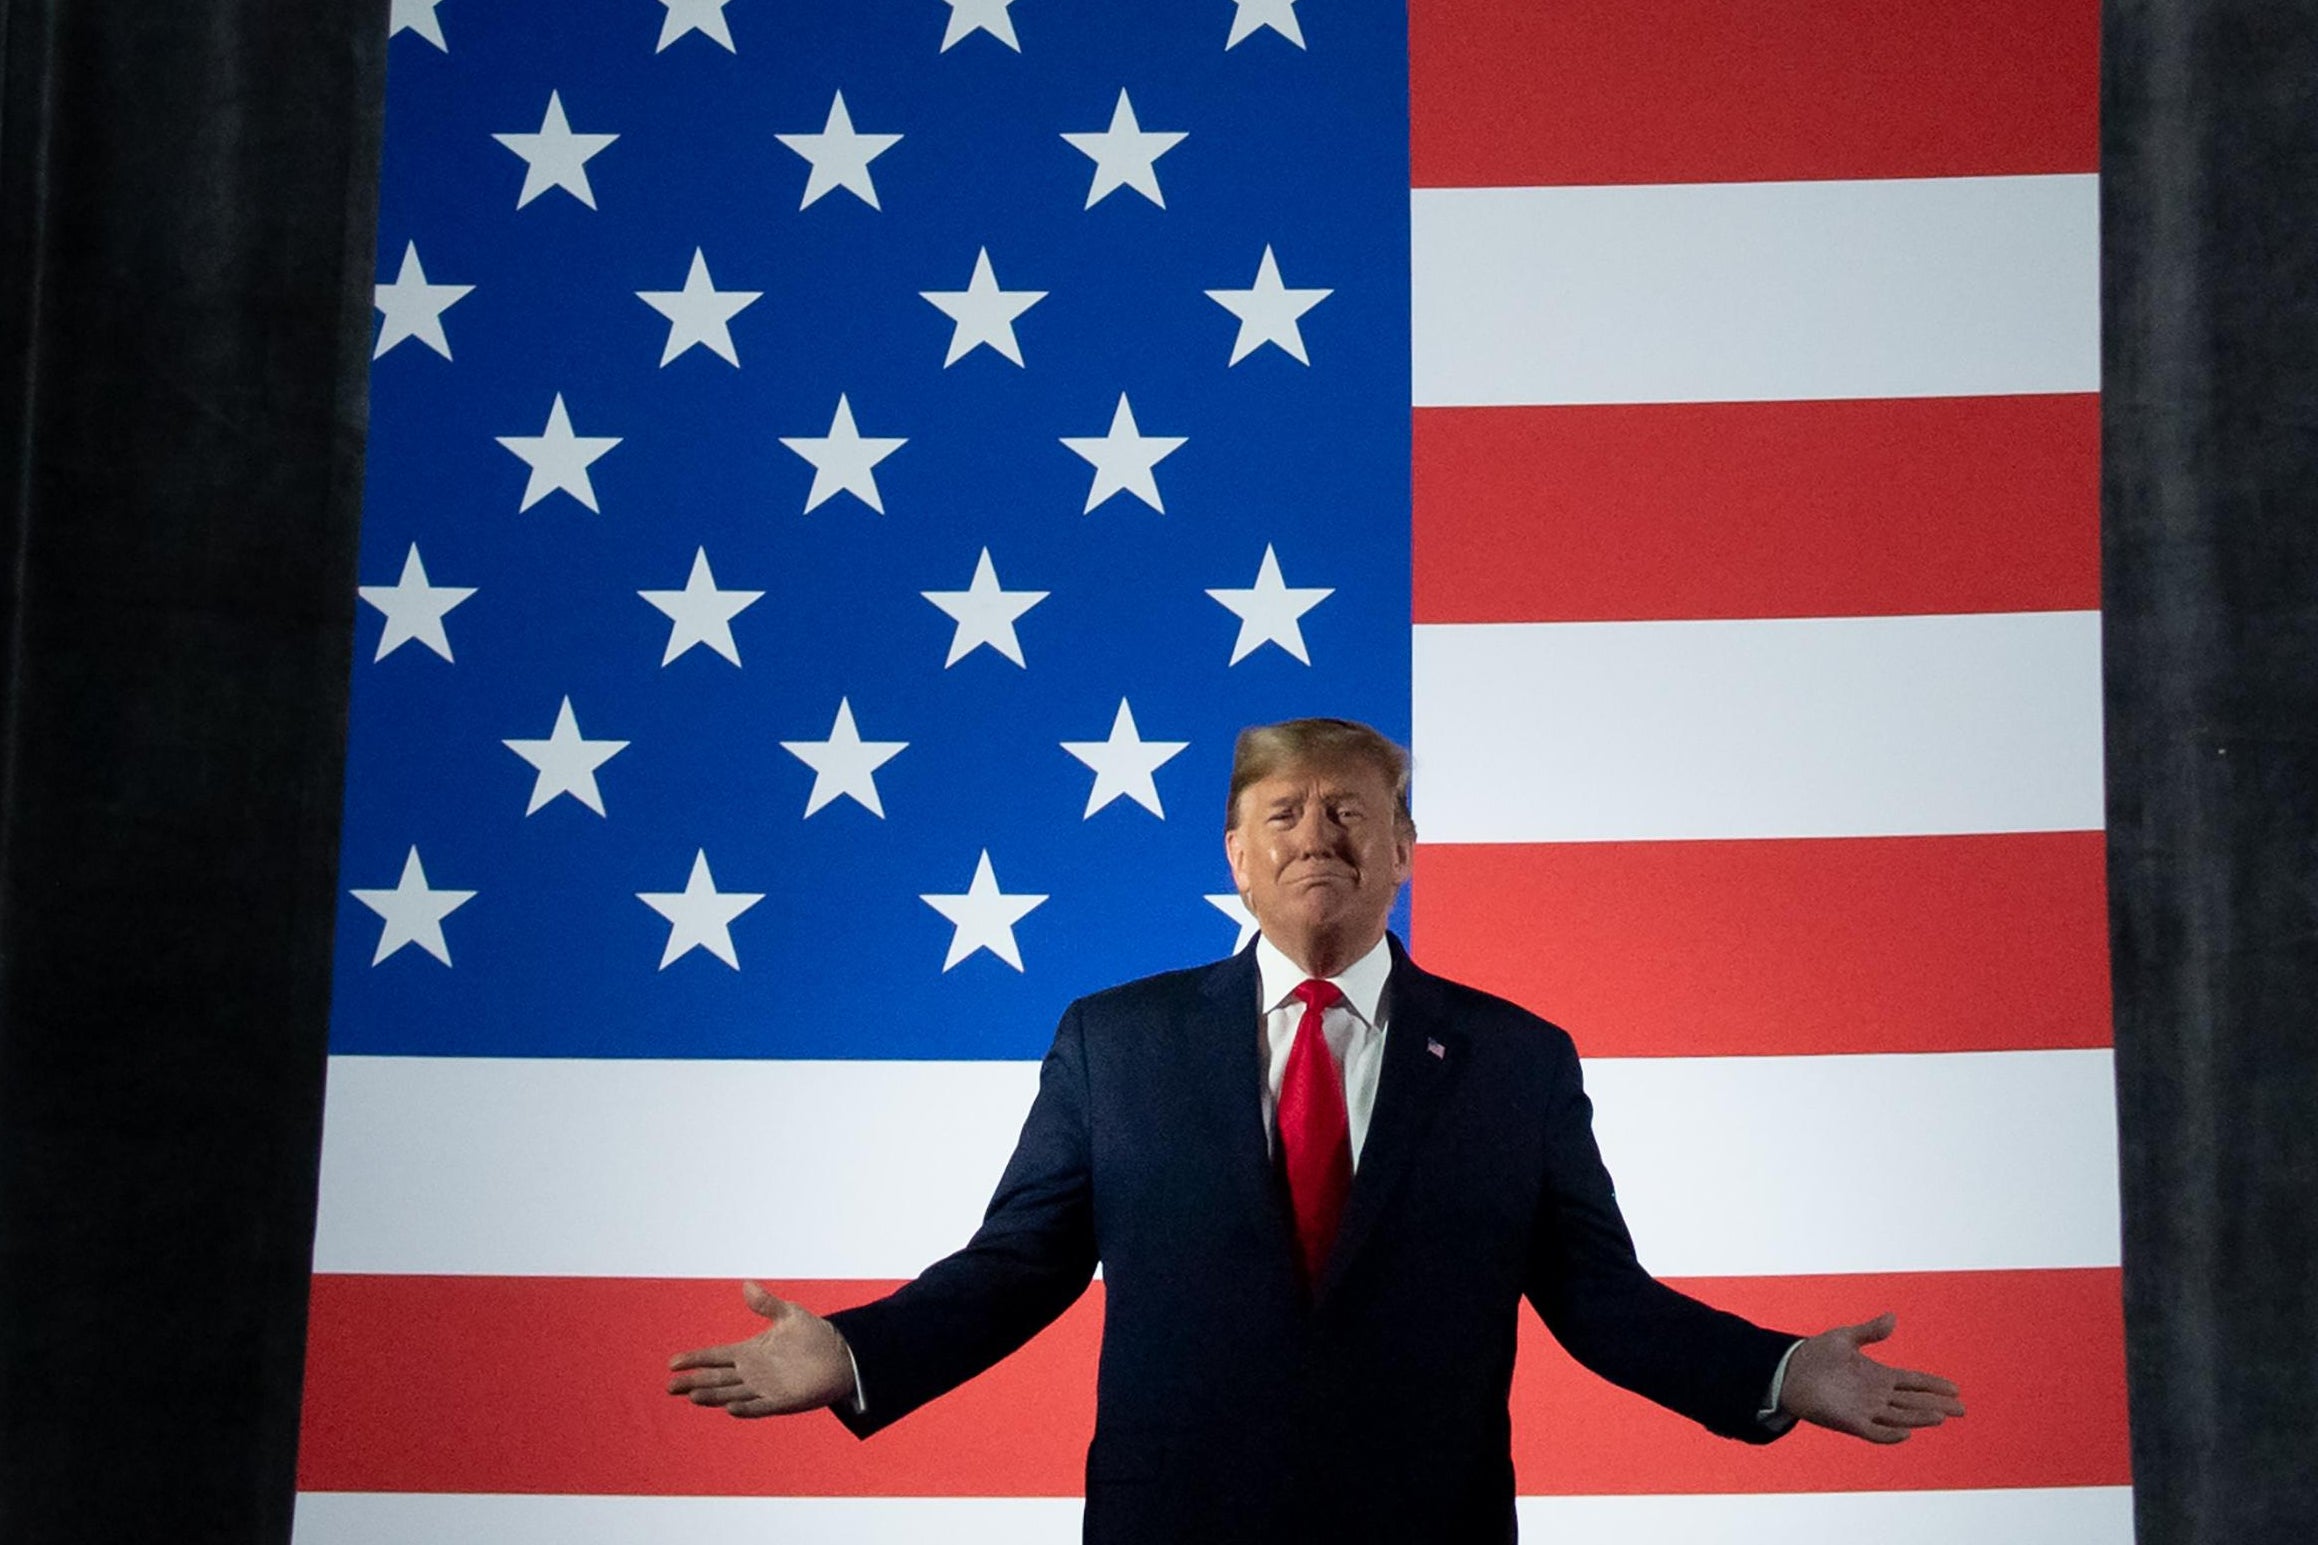 Trump stands onstage with his arms outstretched in front of an American flag.